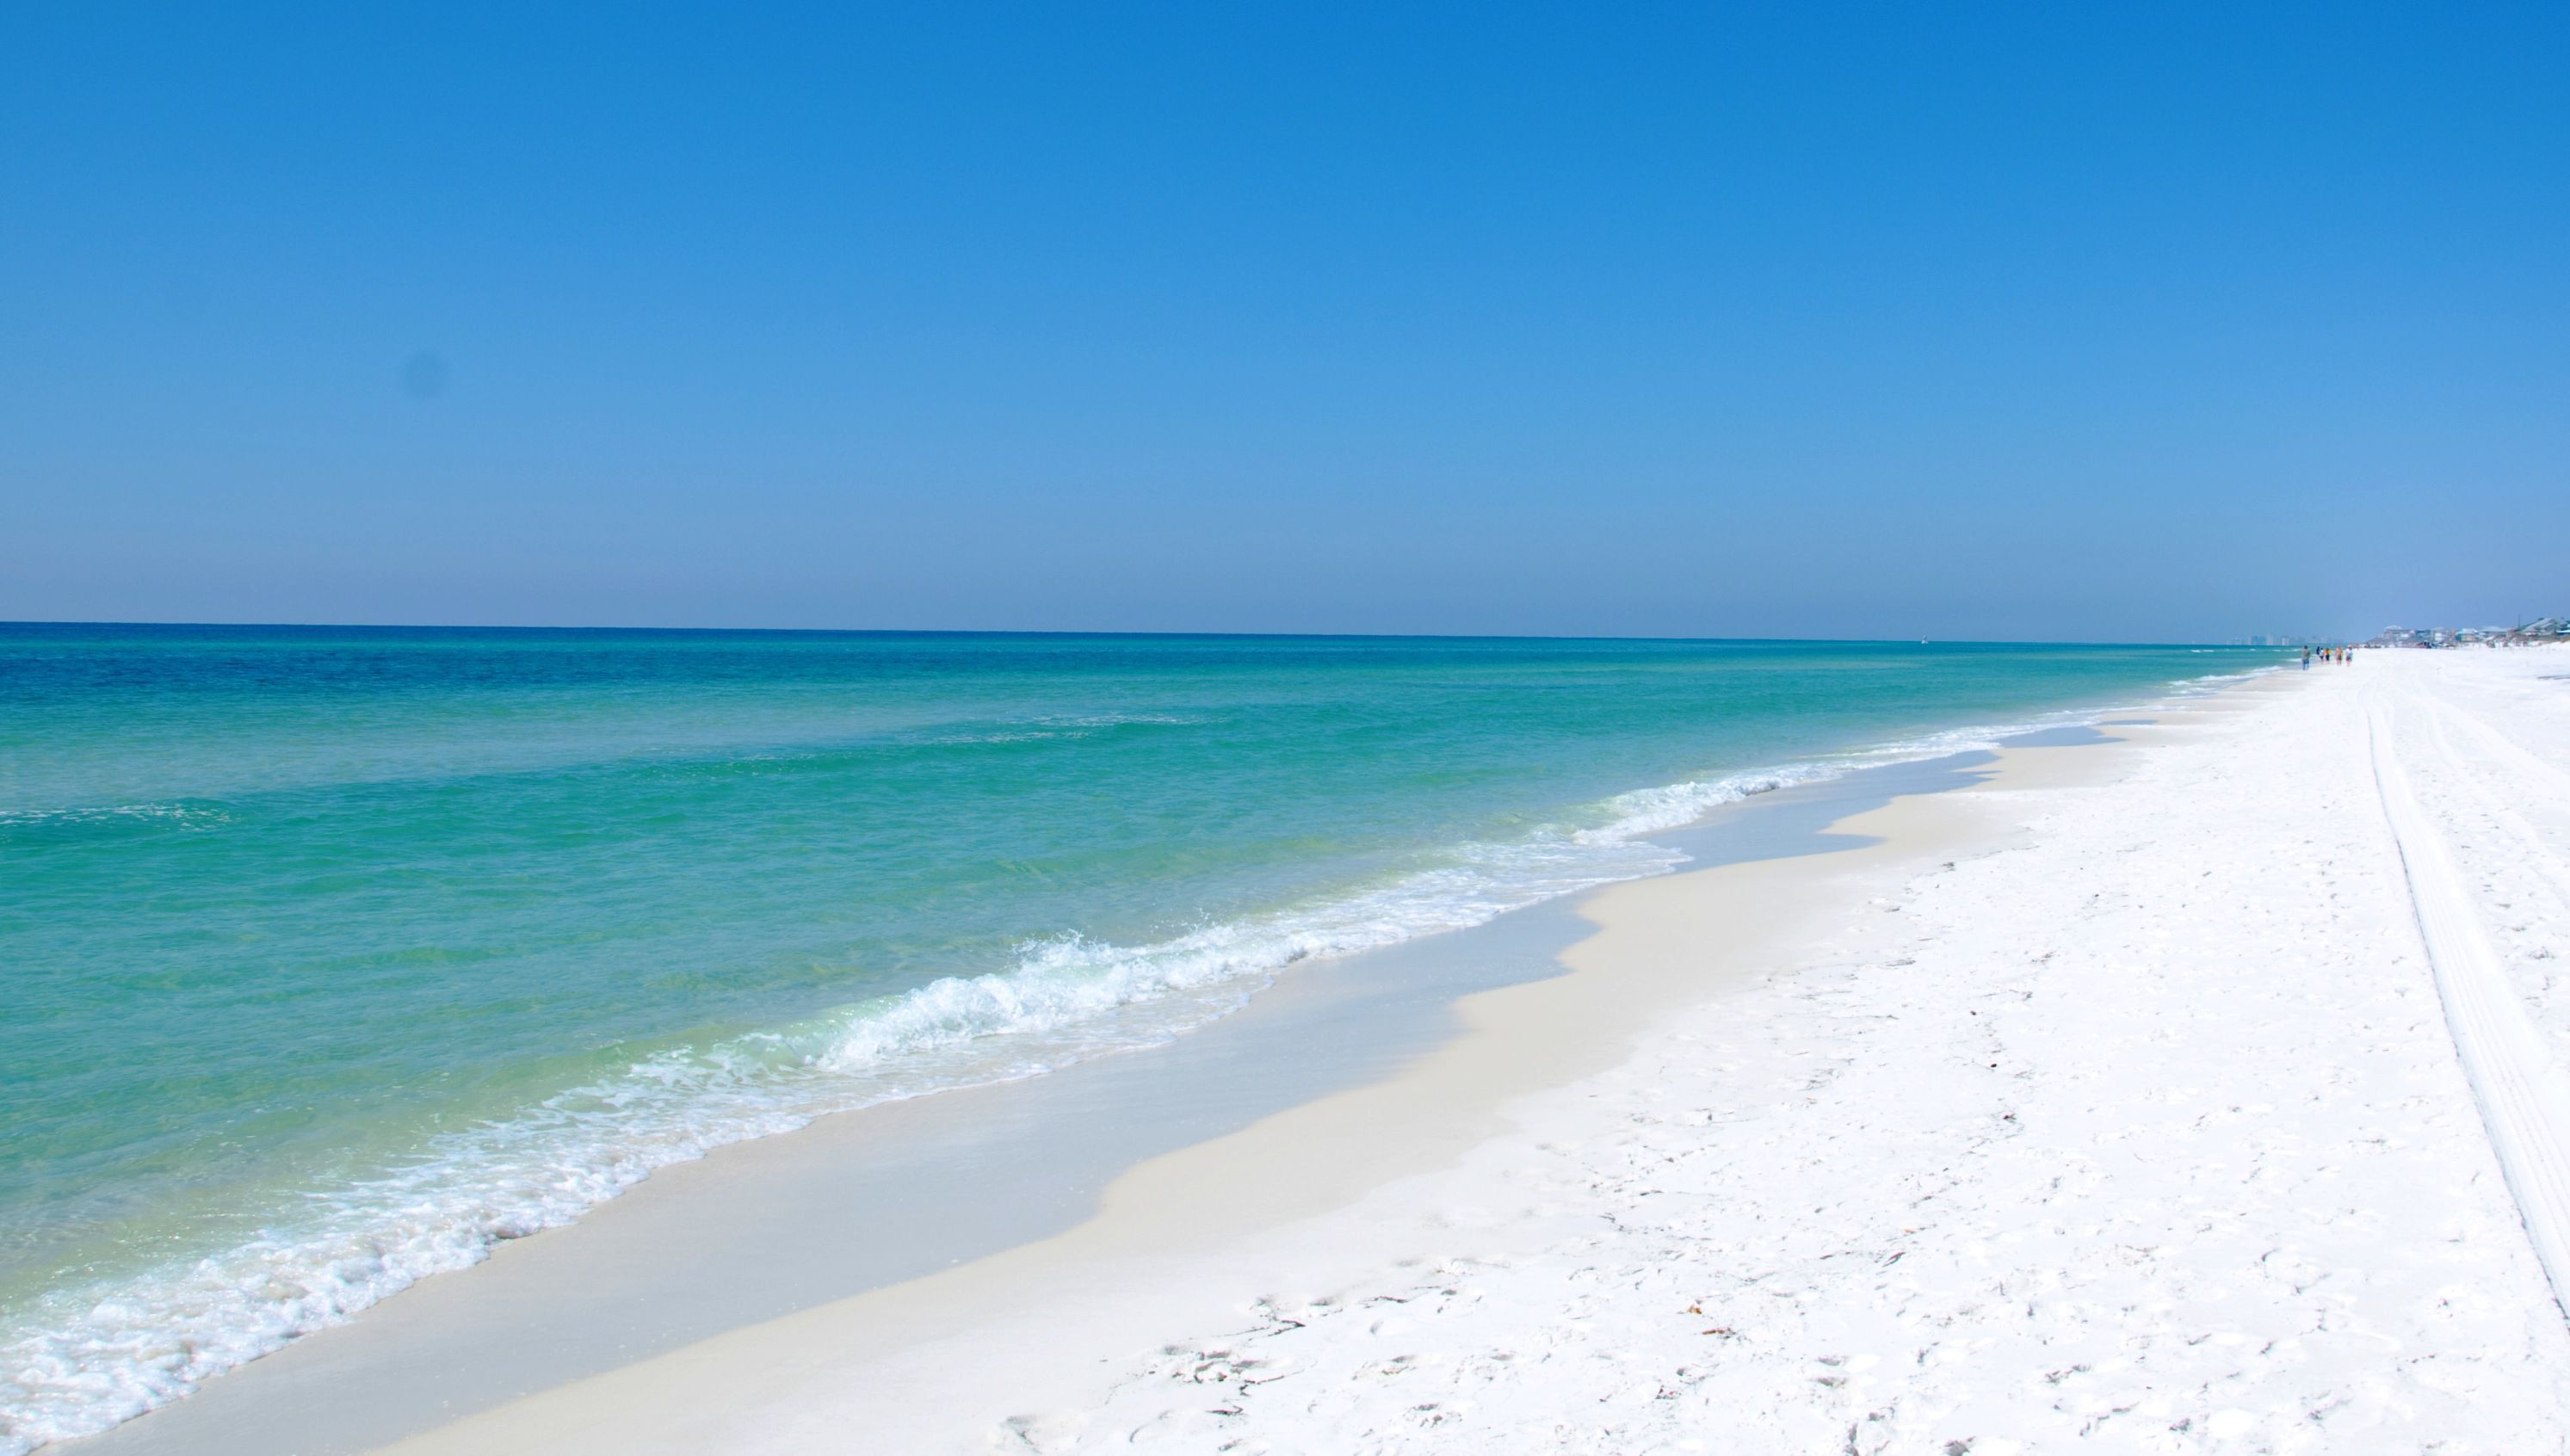 Grayton Beach Is The Best Beach We've Ever Been To. Its Brilliantly White And Powdery Soft Sand Coupled With Turquo. Beach Picture, Beach Wallpaper, Beach Photo